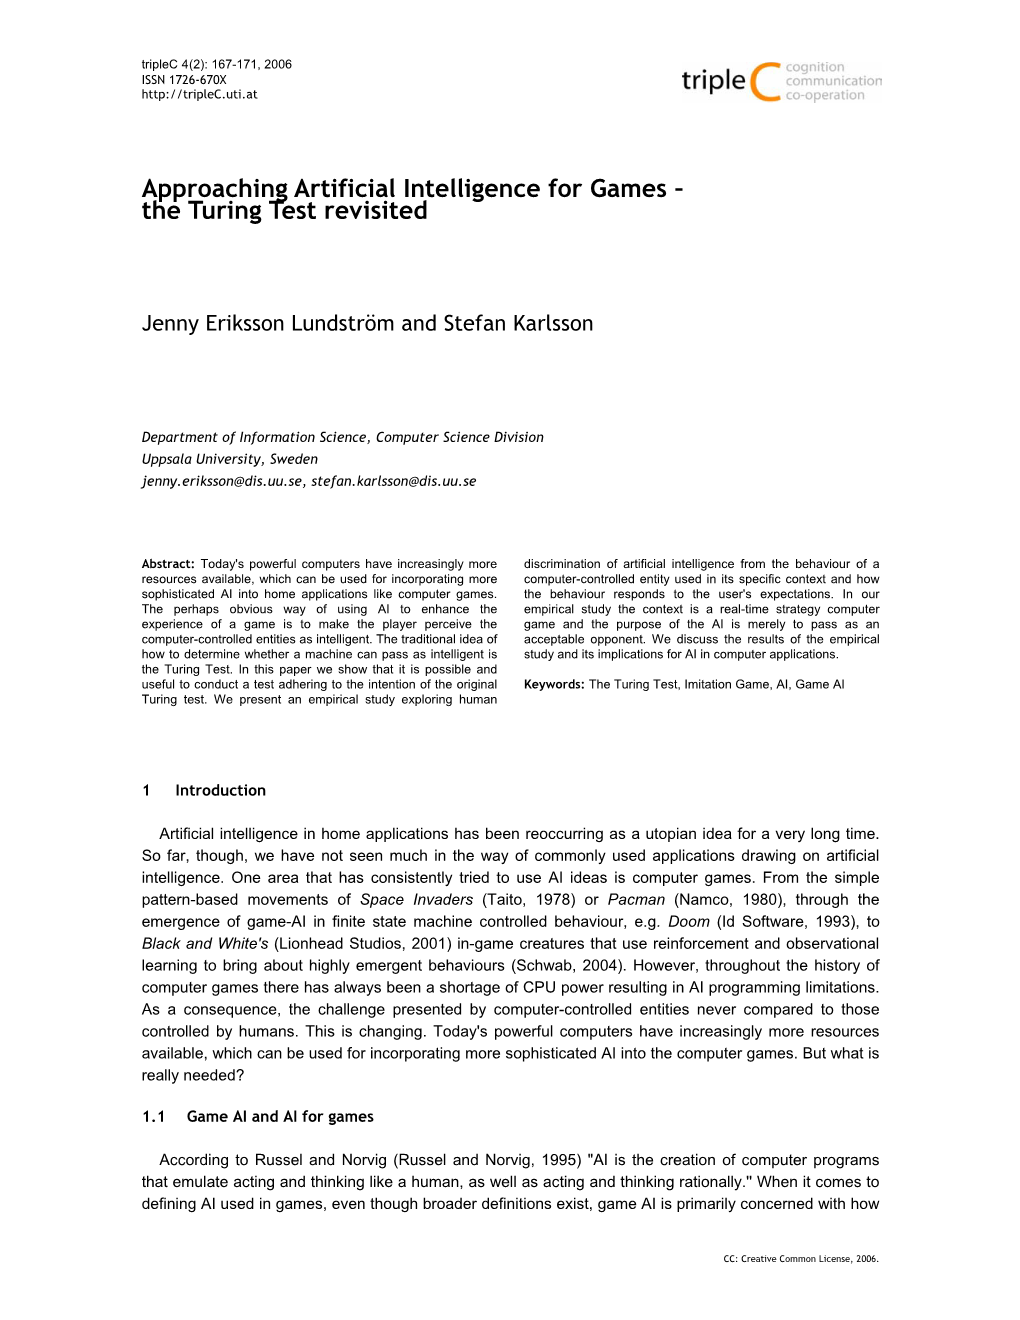 Approaching Artificial Intelligence for Games – the Turing Test Revisited